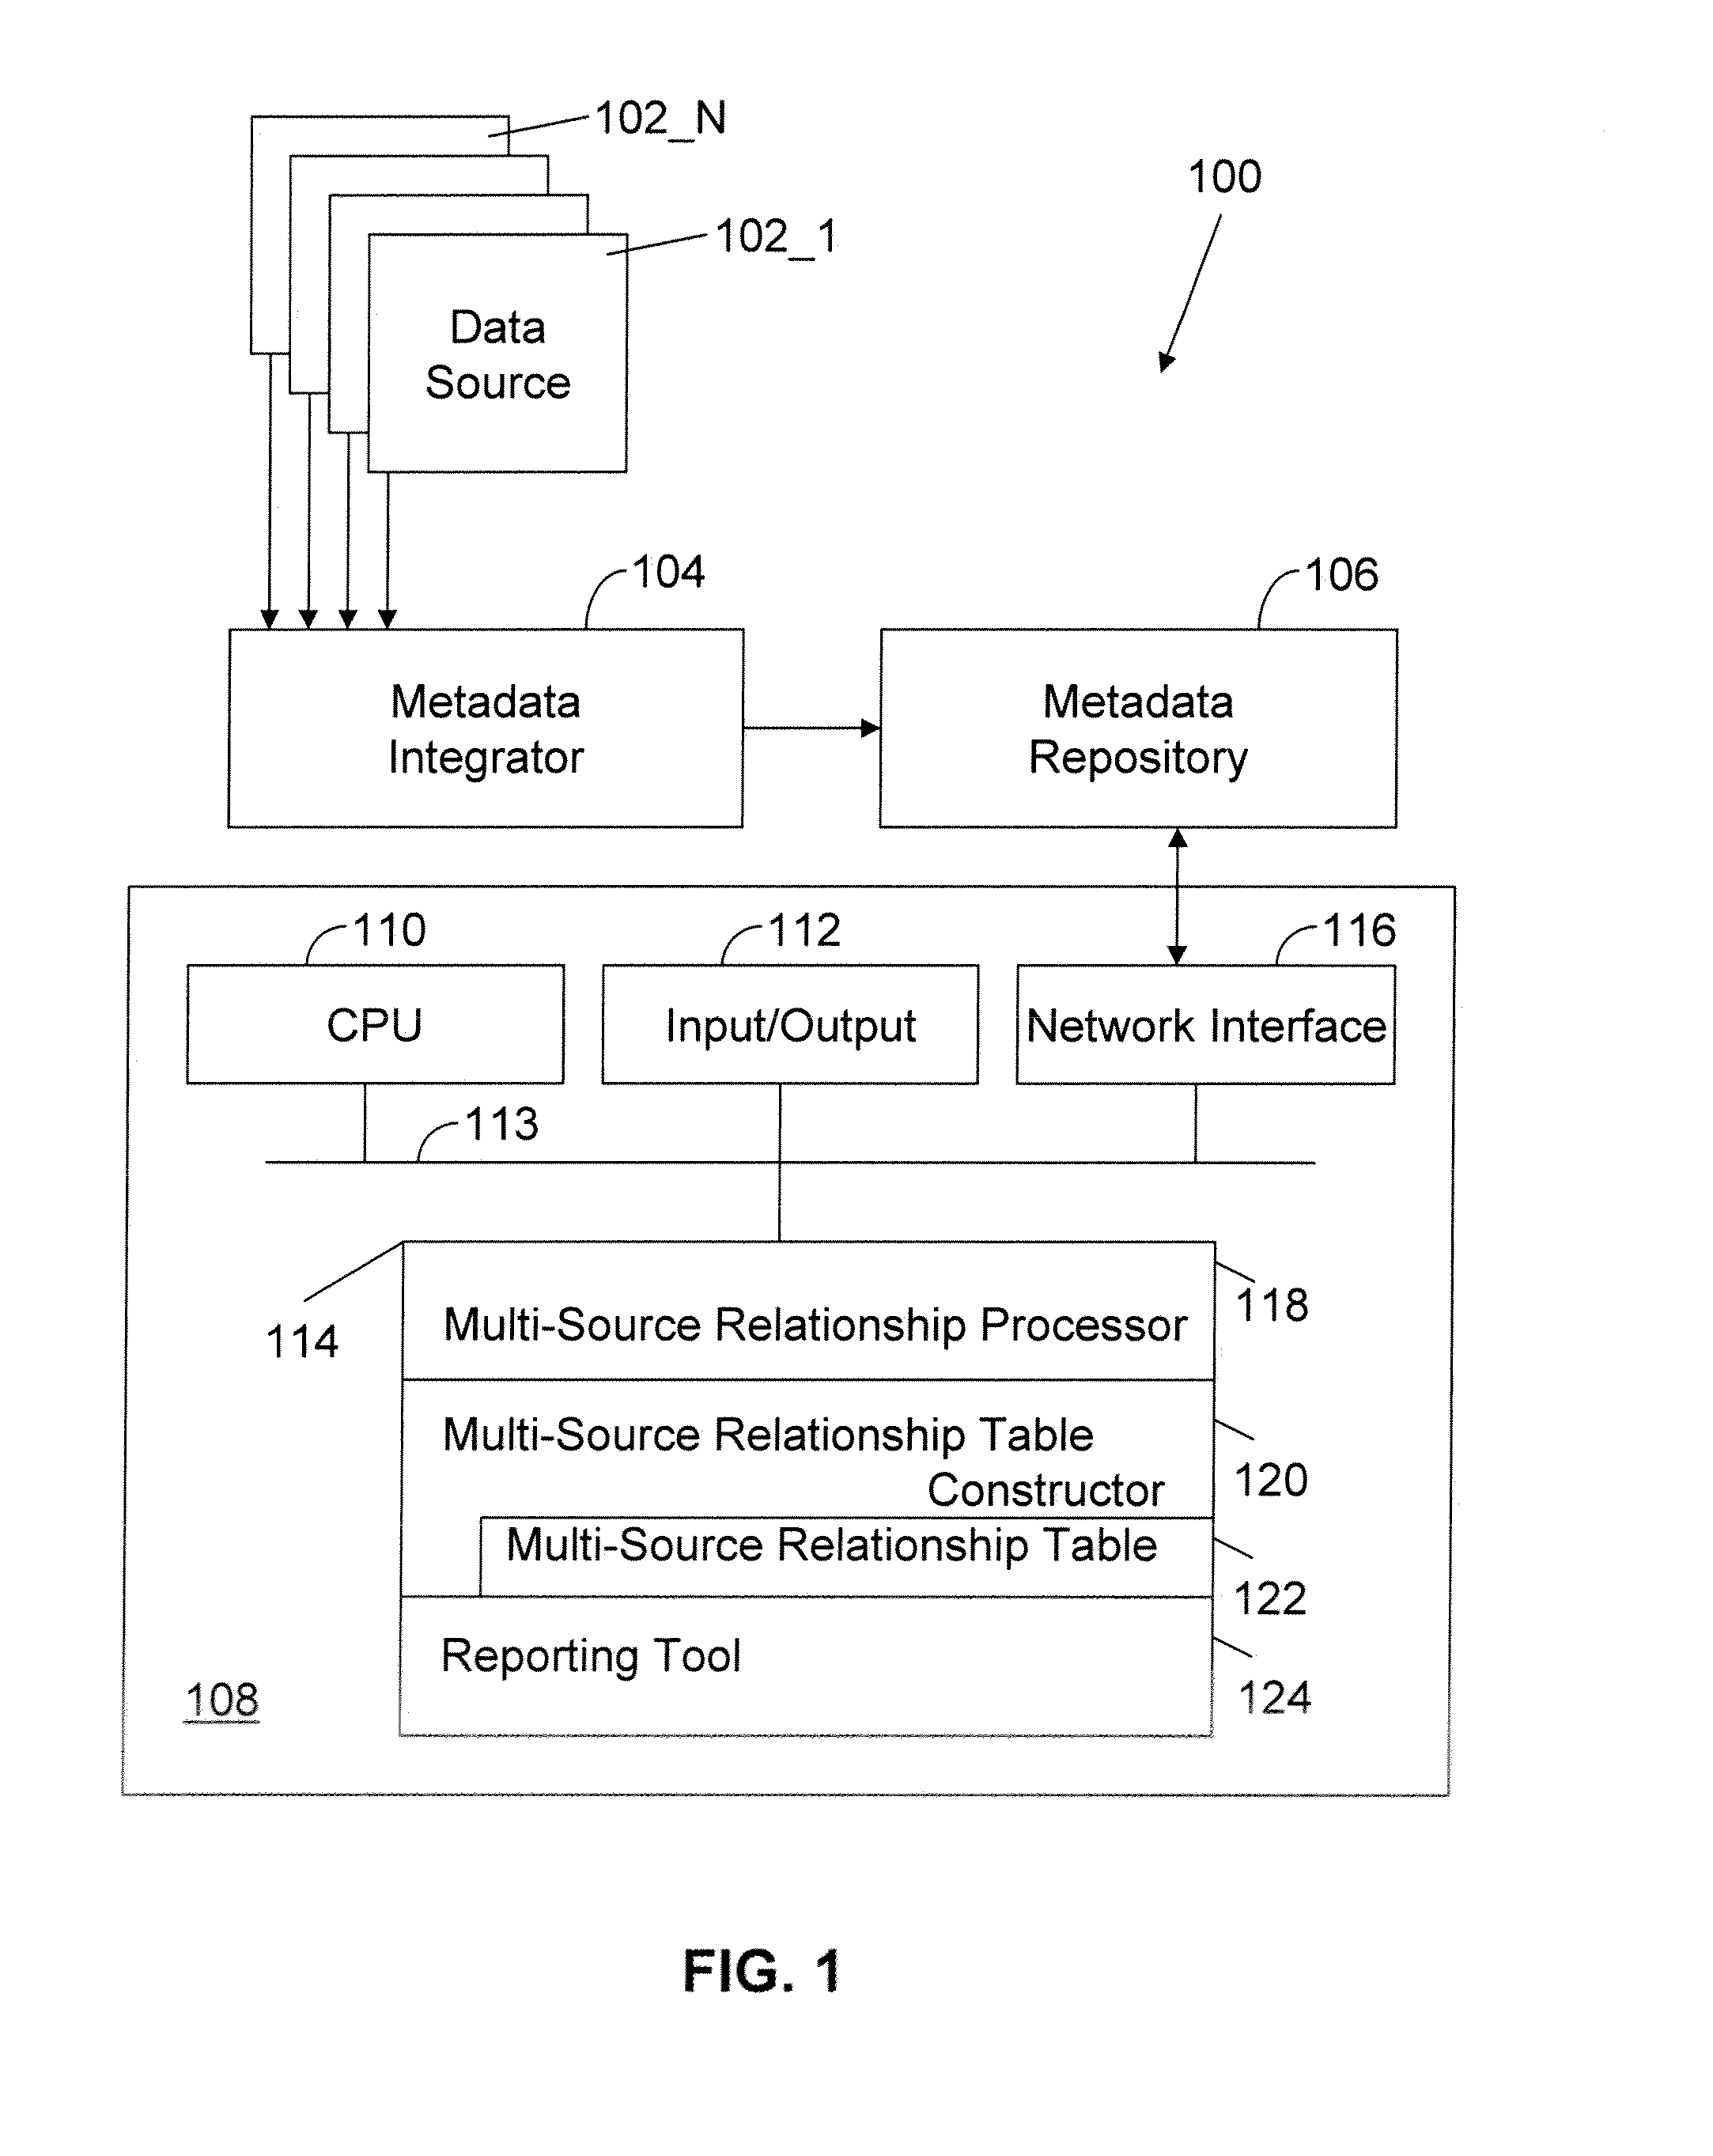 Apparatus and method for analyzing impact and lineage of multiple source data objects